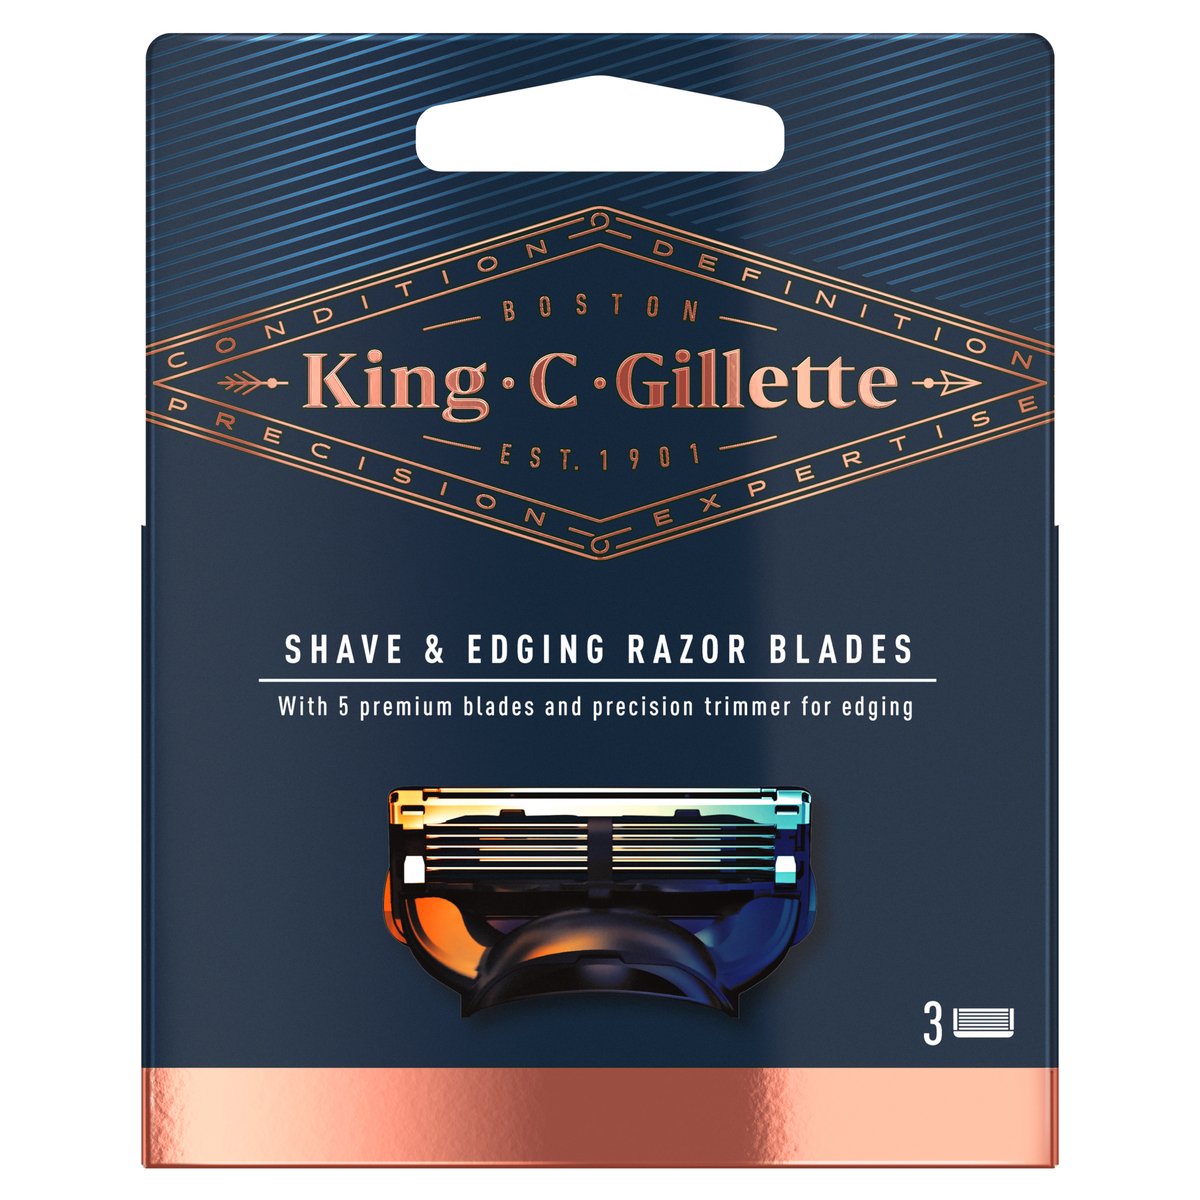 King C. Gillette Men's Refill Shave and Edging Razor Blades Refills with Built In Single Blade Precision Trimmer 3pcs